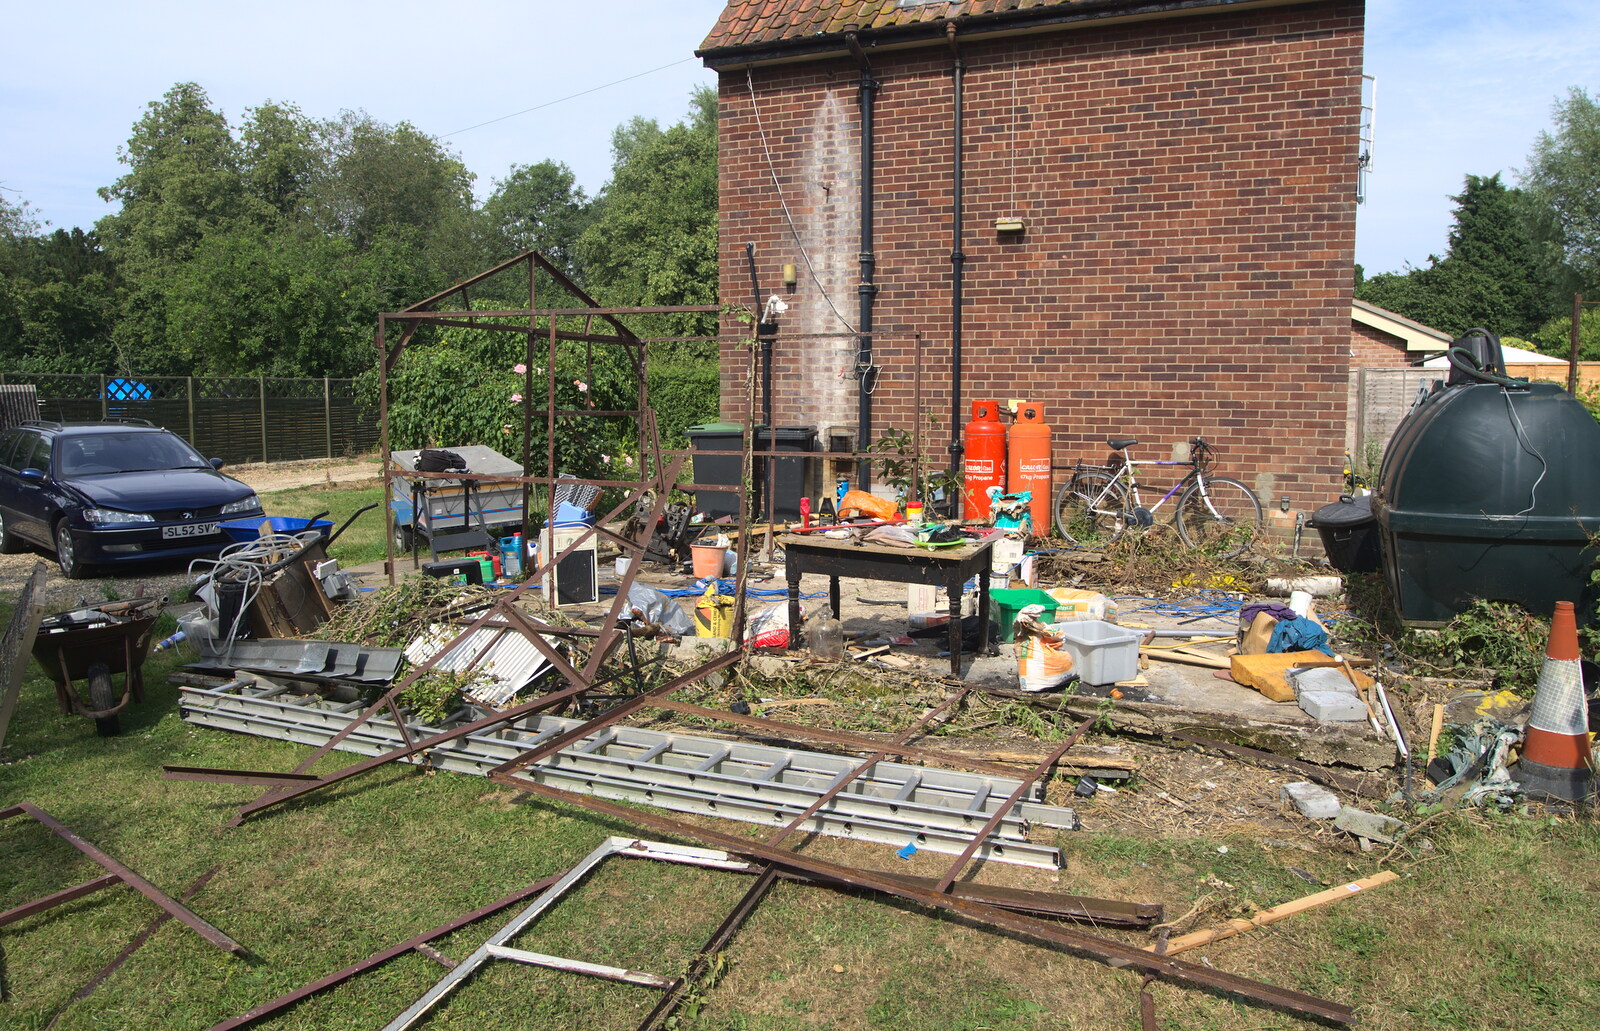 The remains of the garage from An Interview with Rick Wakeman and Other Stories, Diss, Norfolk - 22nd July 2013